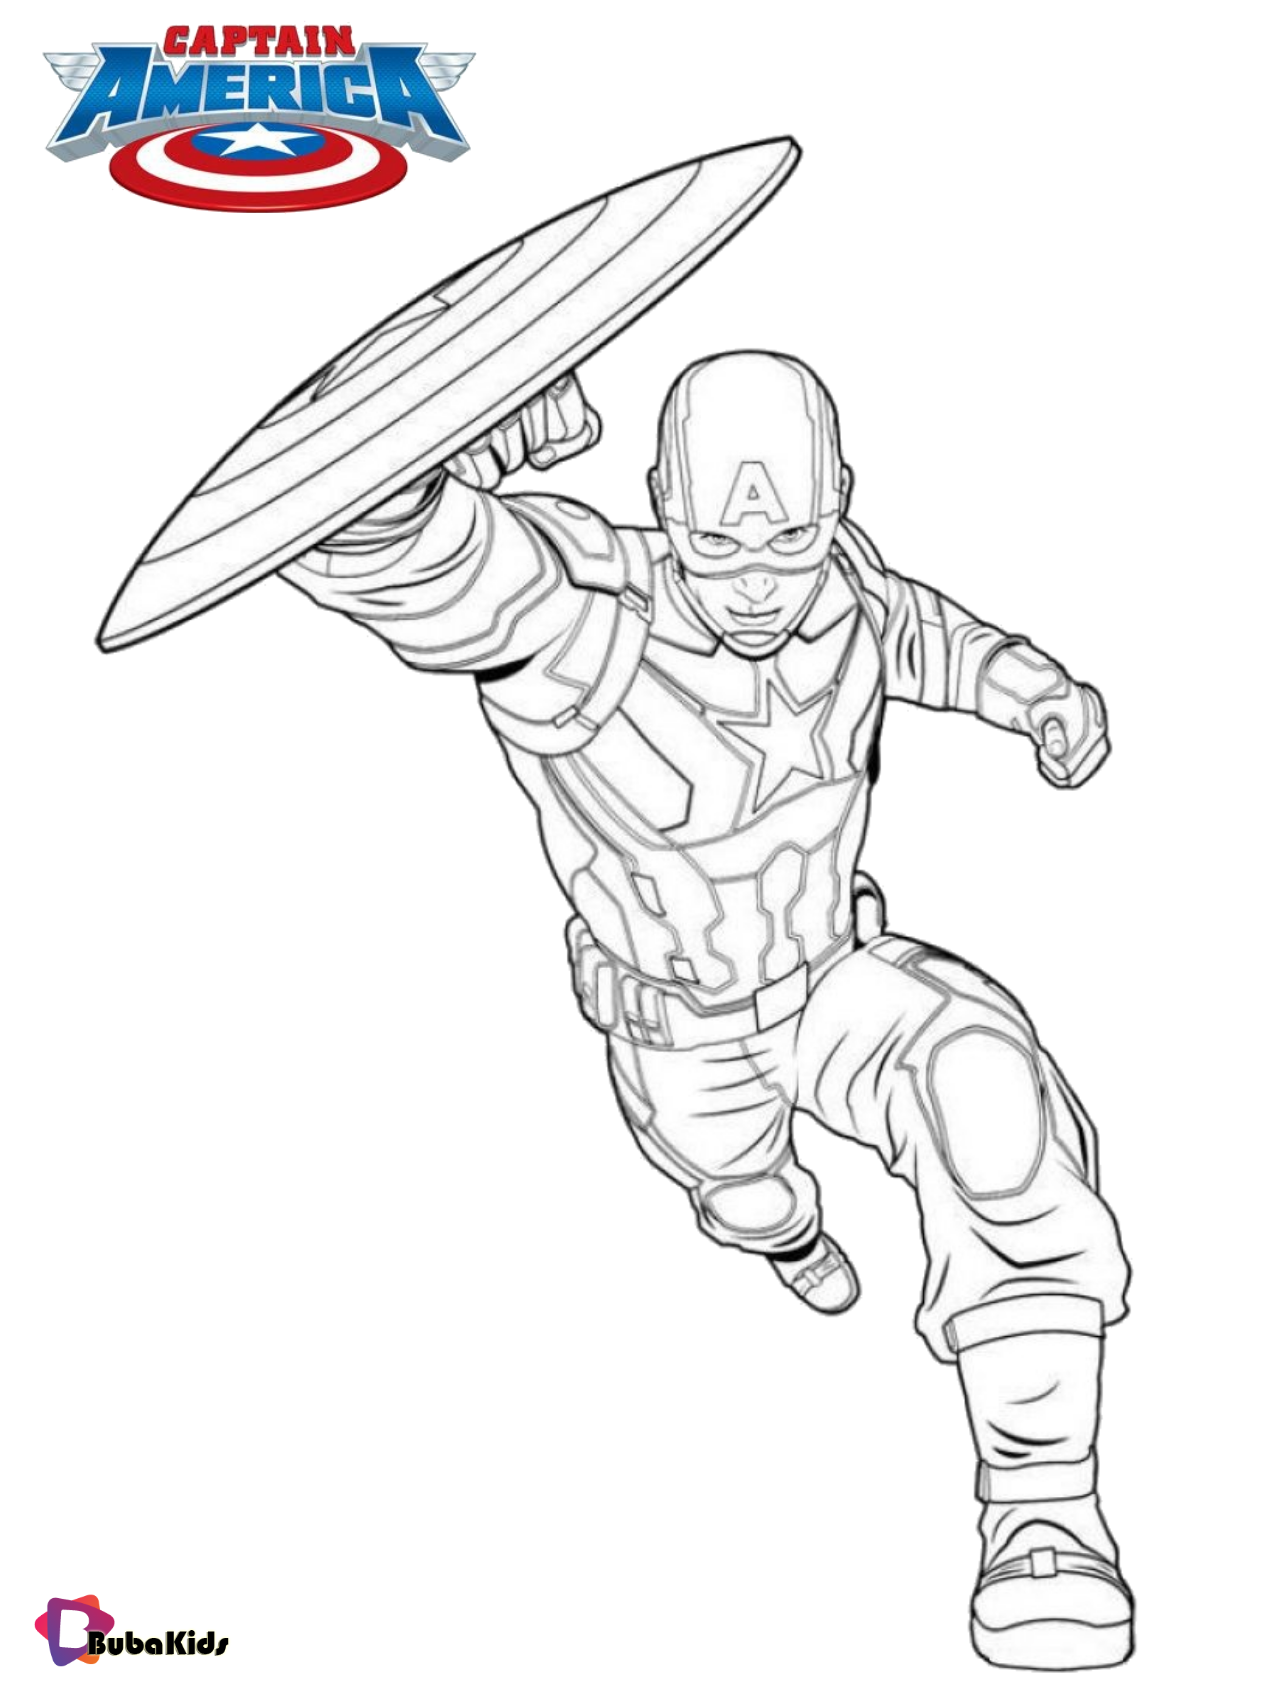 Captain america running with shield coloring pages Wallpaper